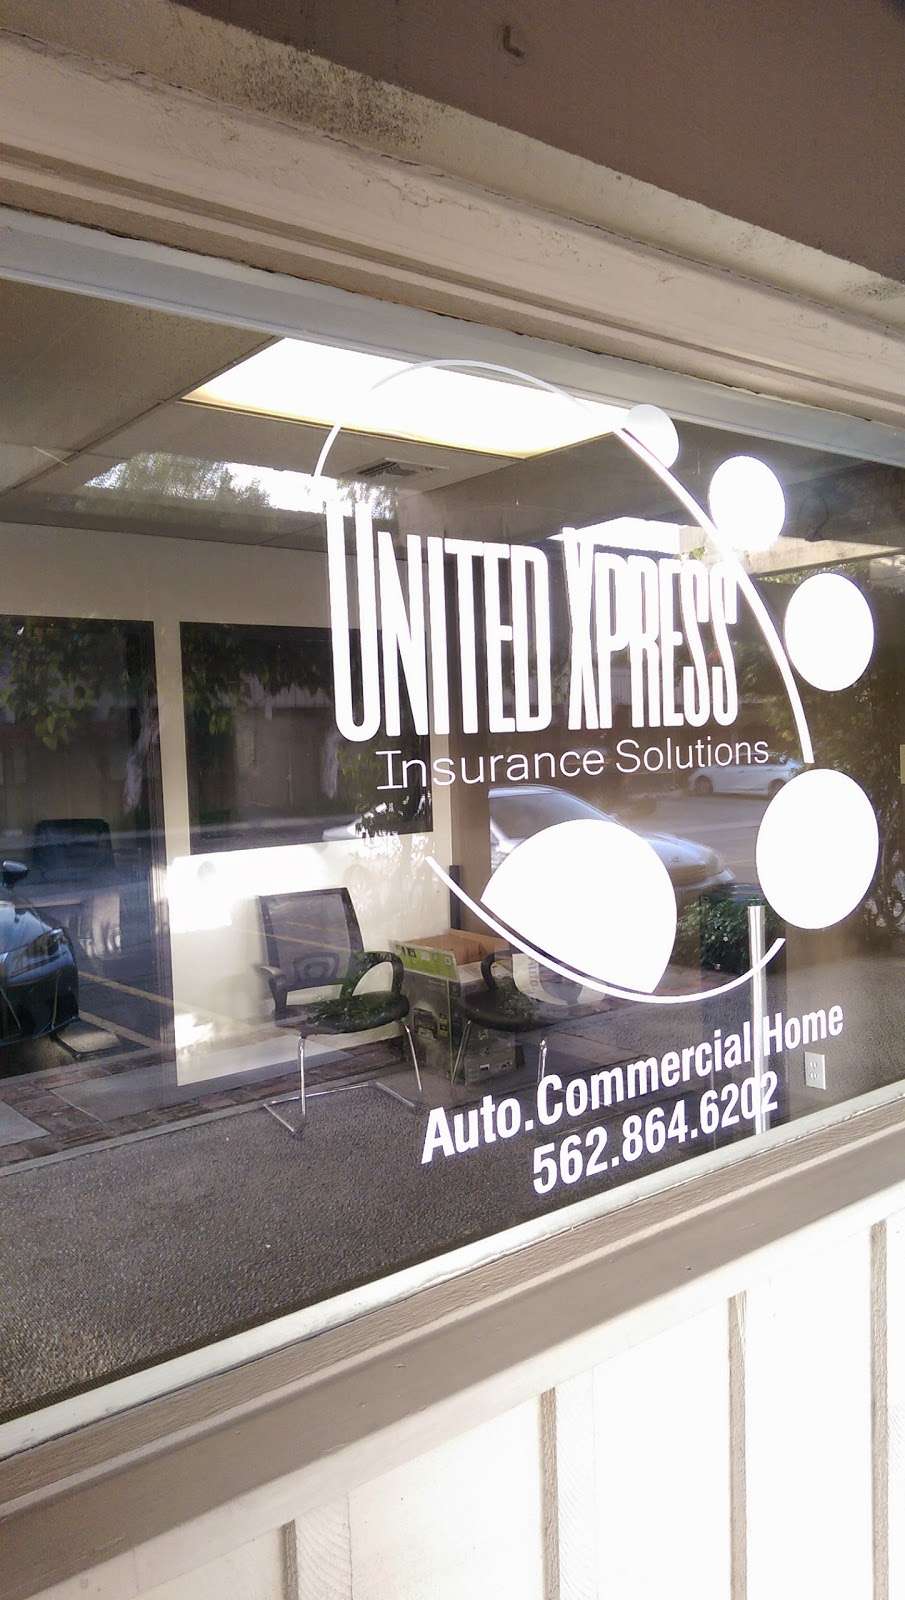 United Xpress Insurance Solutions | 12631 Imperial Hwy A102, Santa Fe Springs, CA 90670, USA | Phone: (562) 864-6202